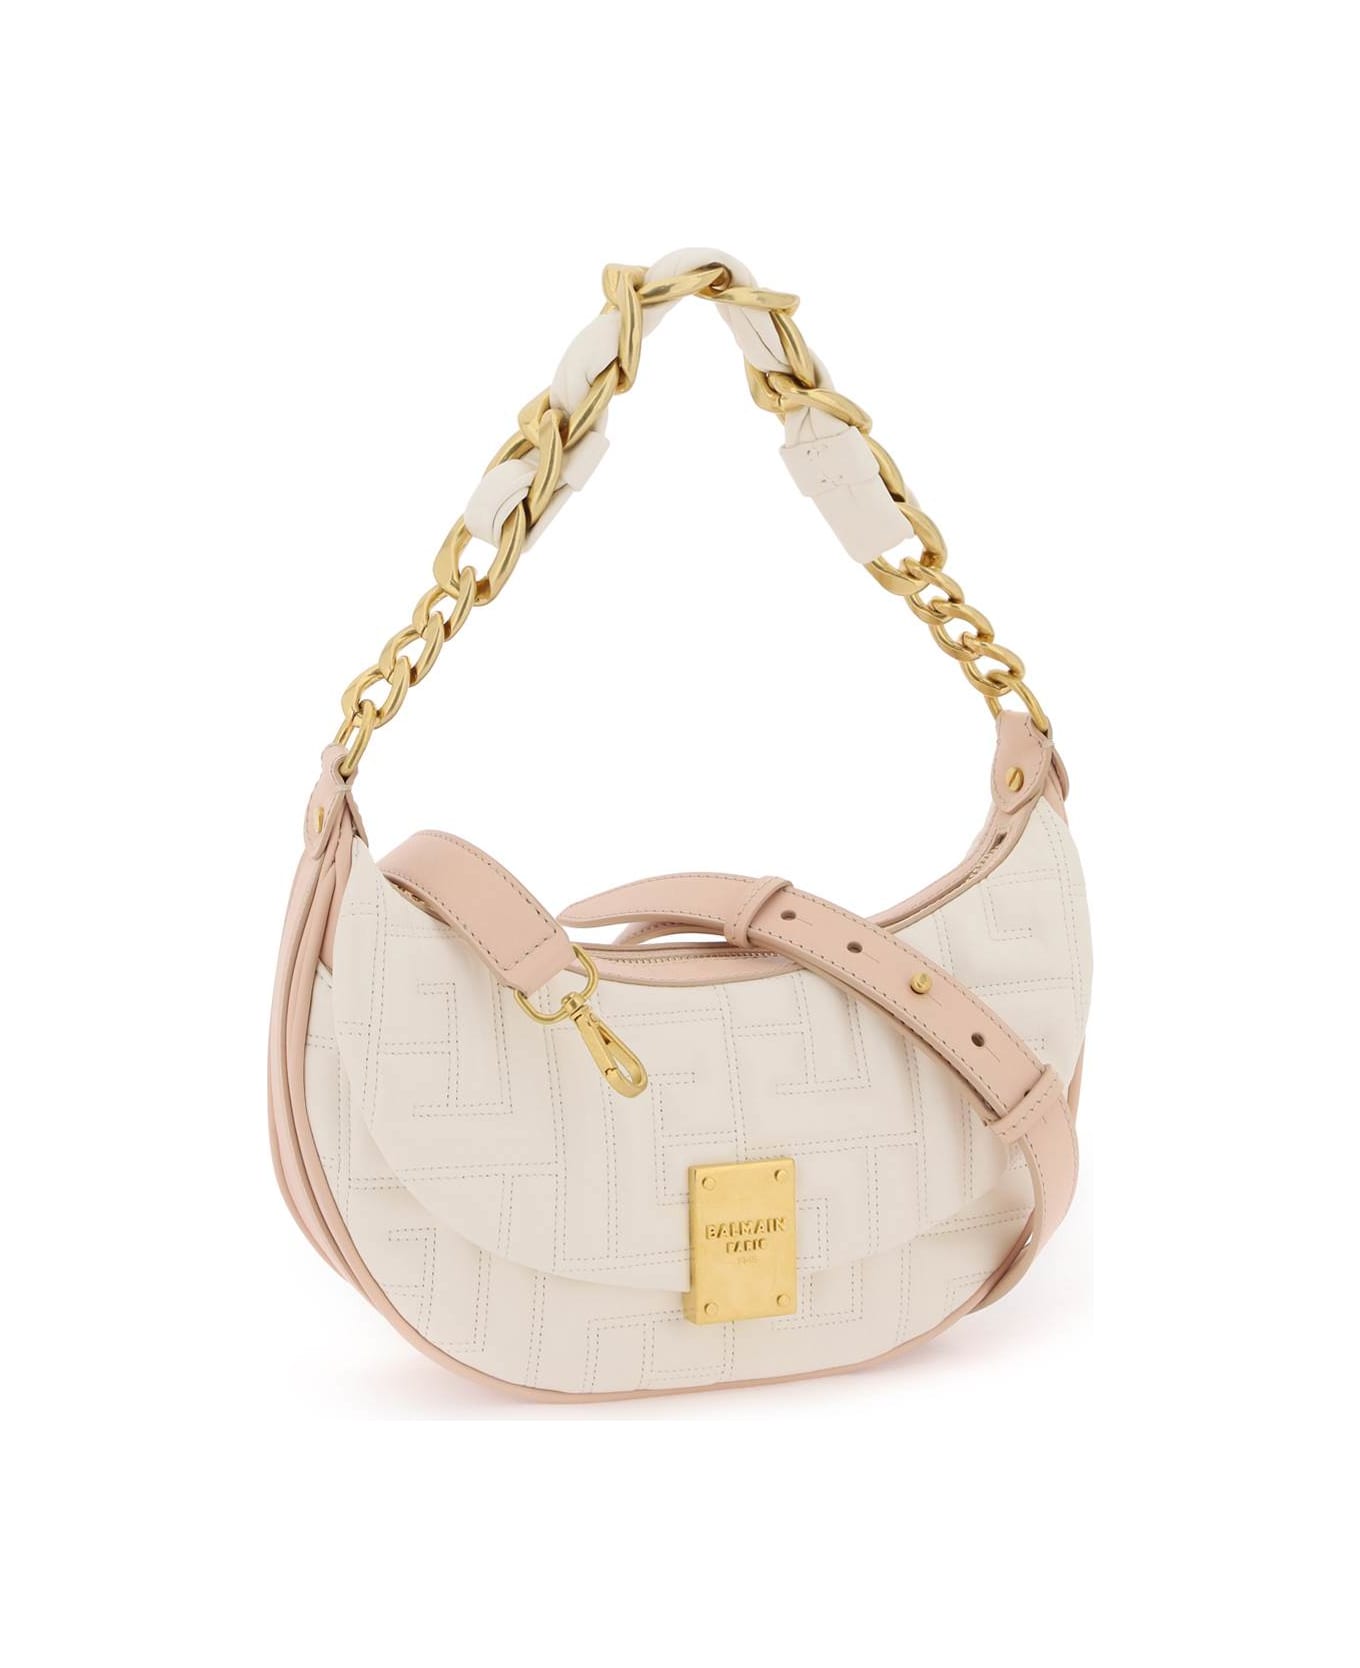 Balmain 1945 Soft Quilted Leather Hobo Bag - CREME NUDE ROSÉ (White) トートバッグ